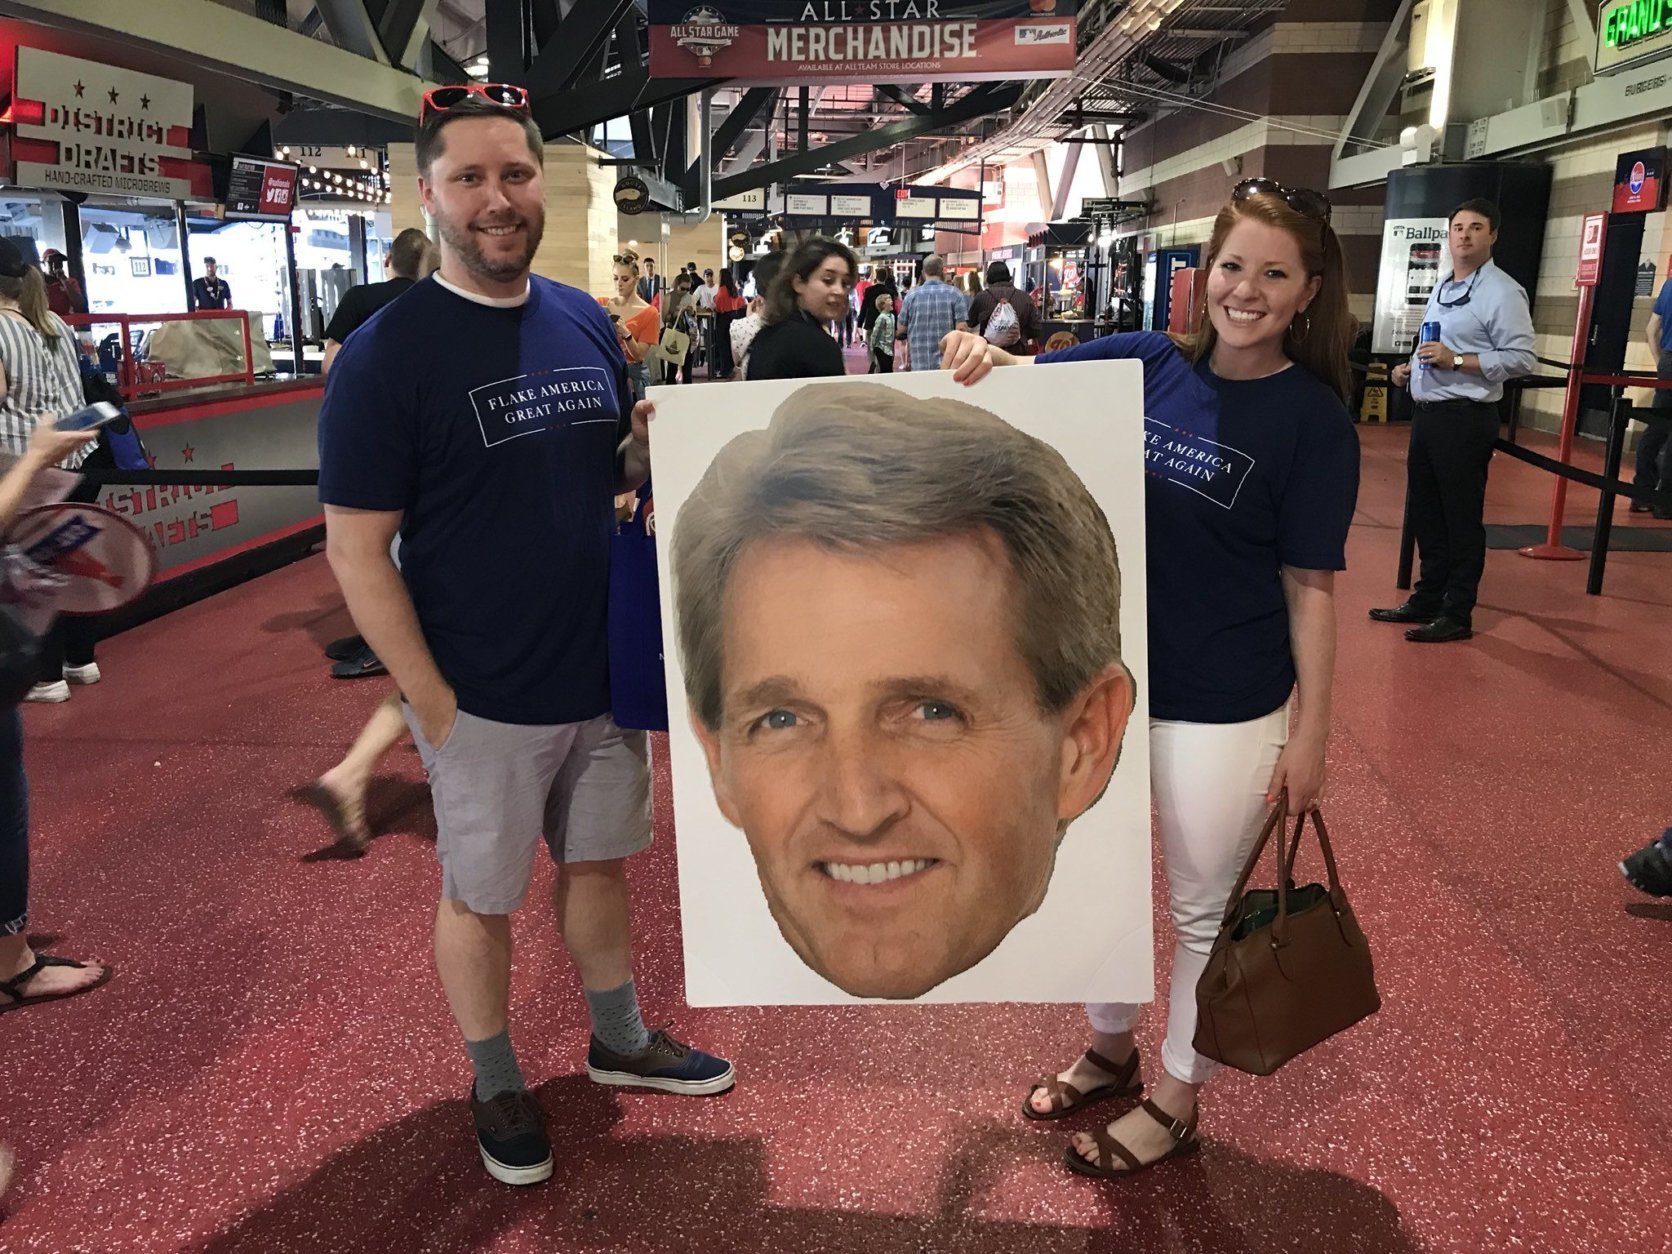 These attendees are here to support one player/senator: their shirts read "Flake America Great Again." (WTOP/Michelle Basch)